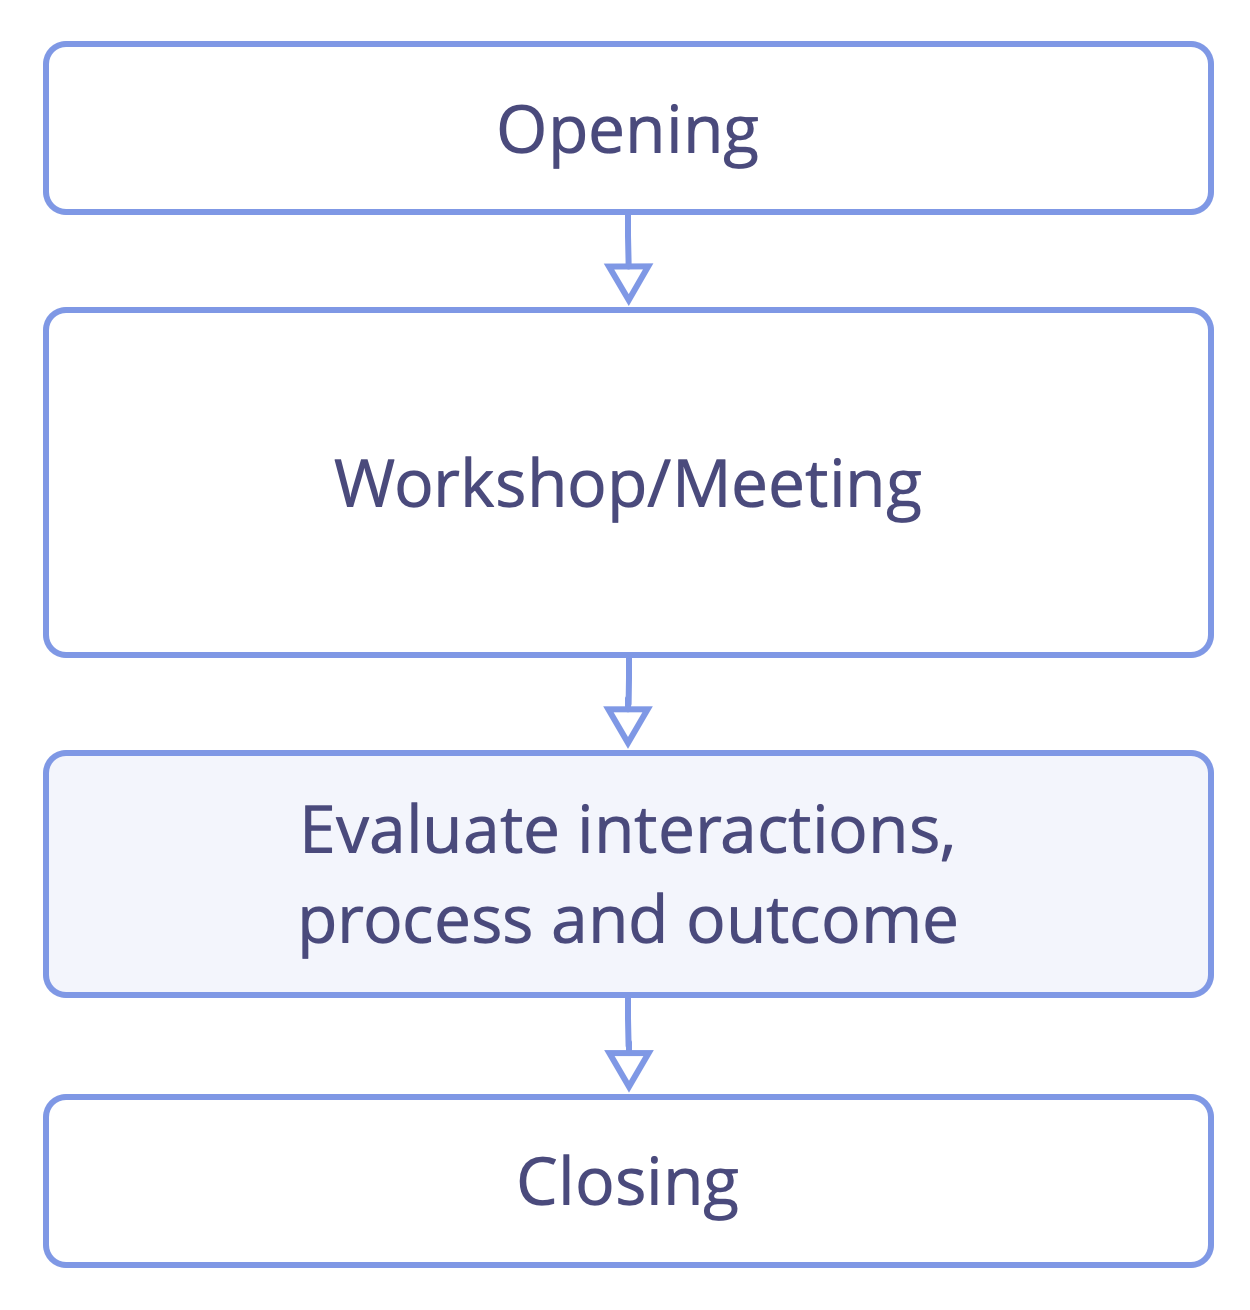 Evaluate meetings right before closing the meeting